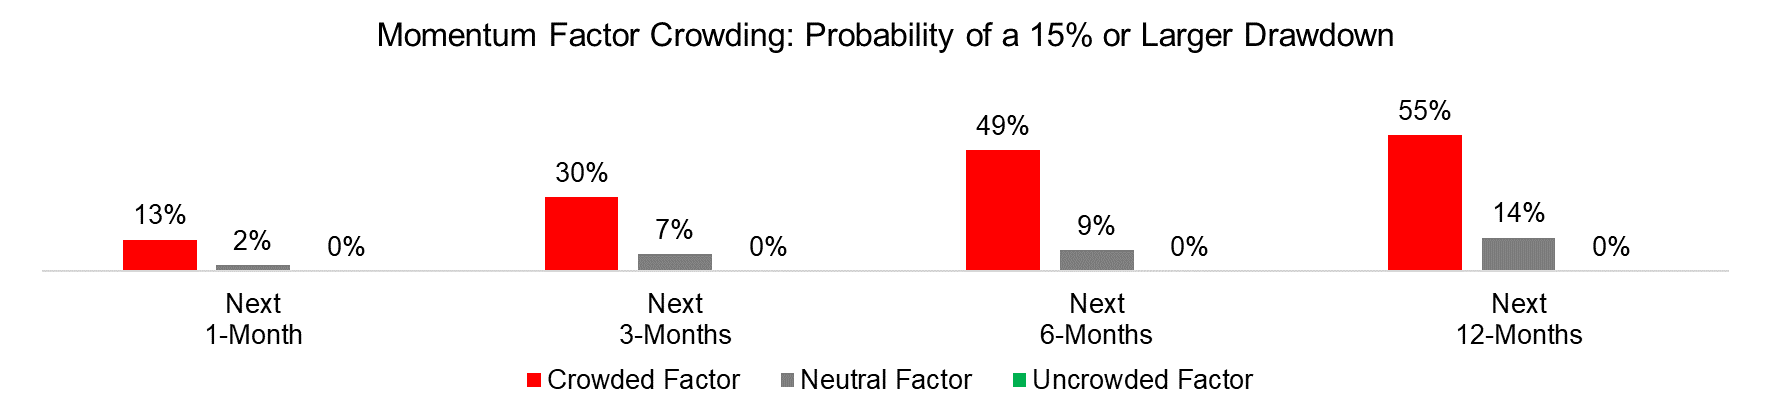 Momentum Factor Crowding Probability of a 15% or Larger Drawdown